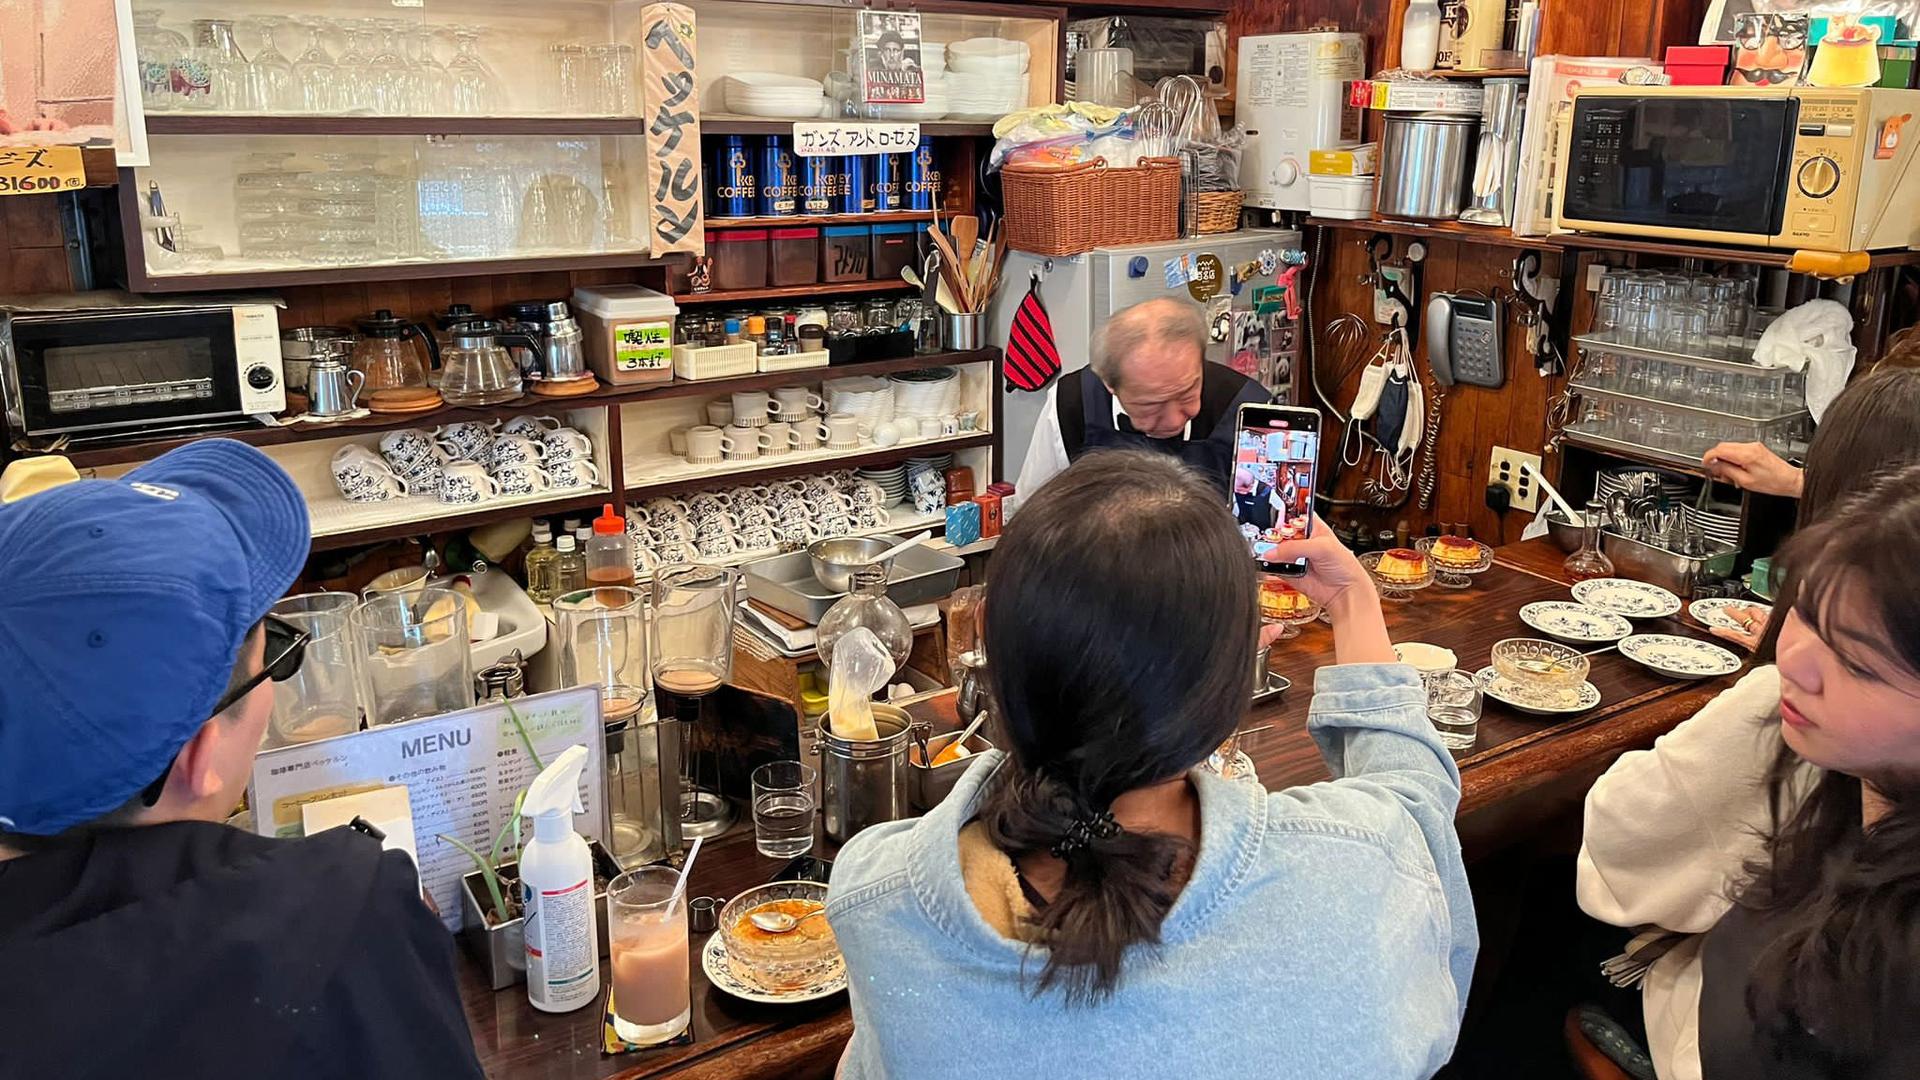 Customers get out their smartphones and go silent as Shizuo Mori begins his pudding-fling serving technique that made him a viral sensation.